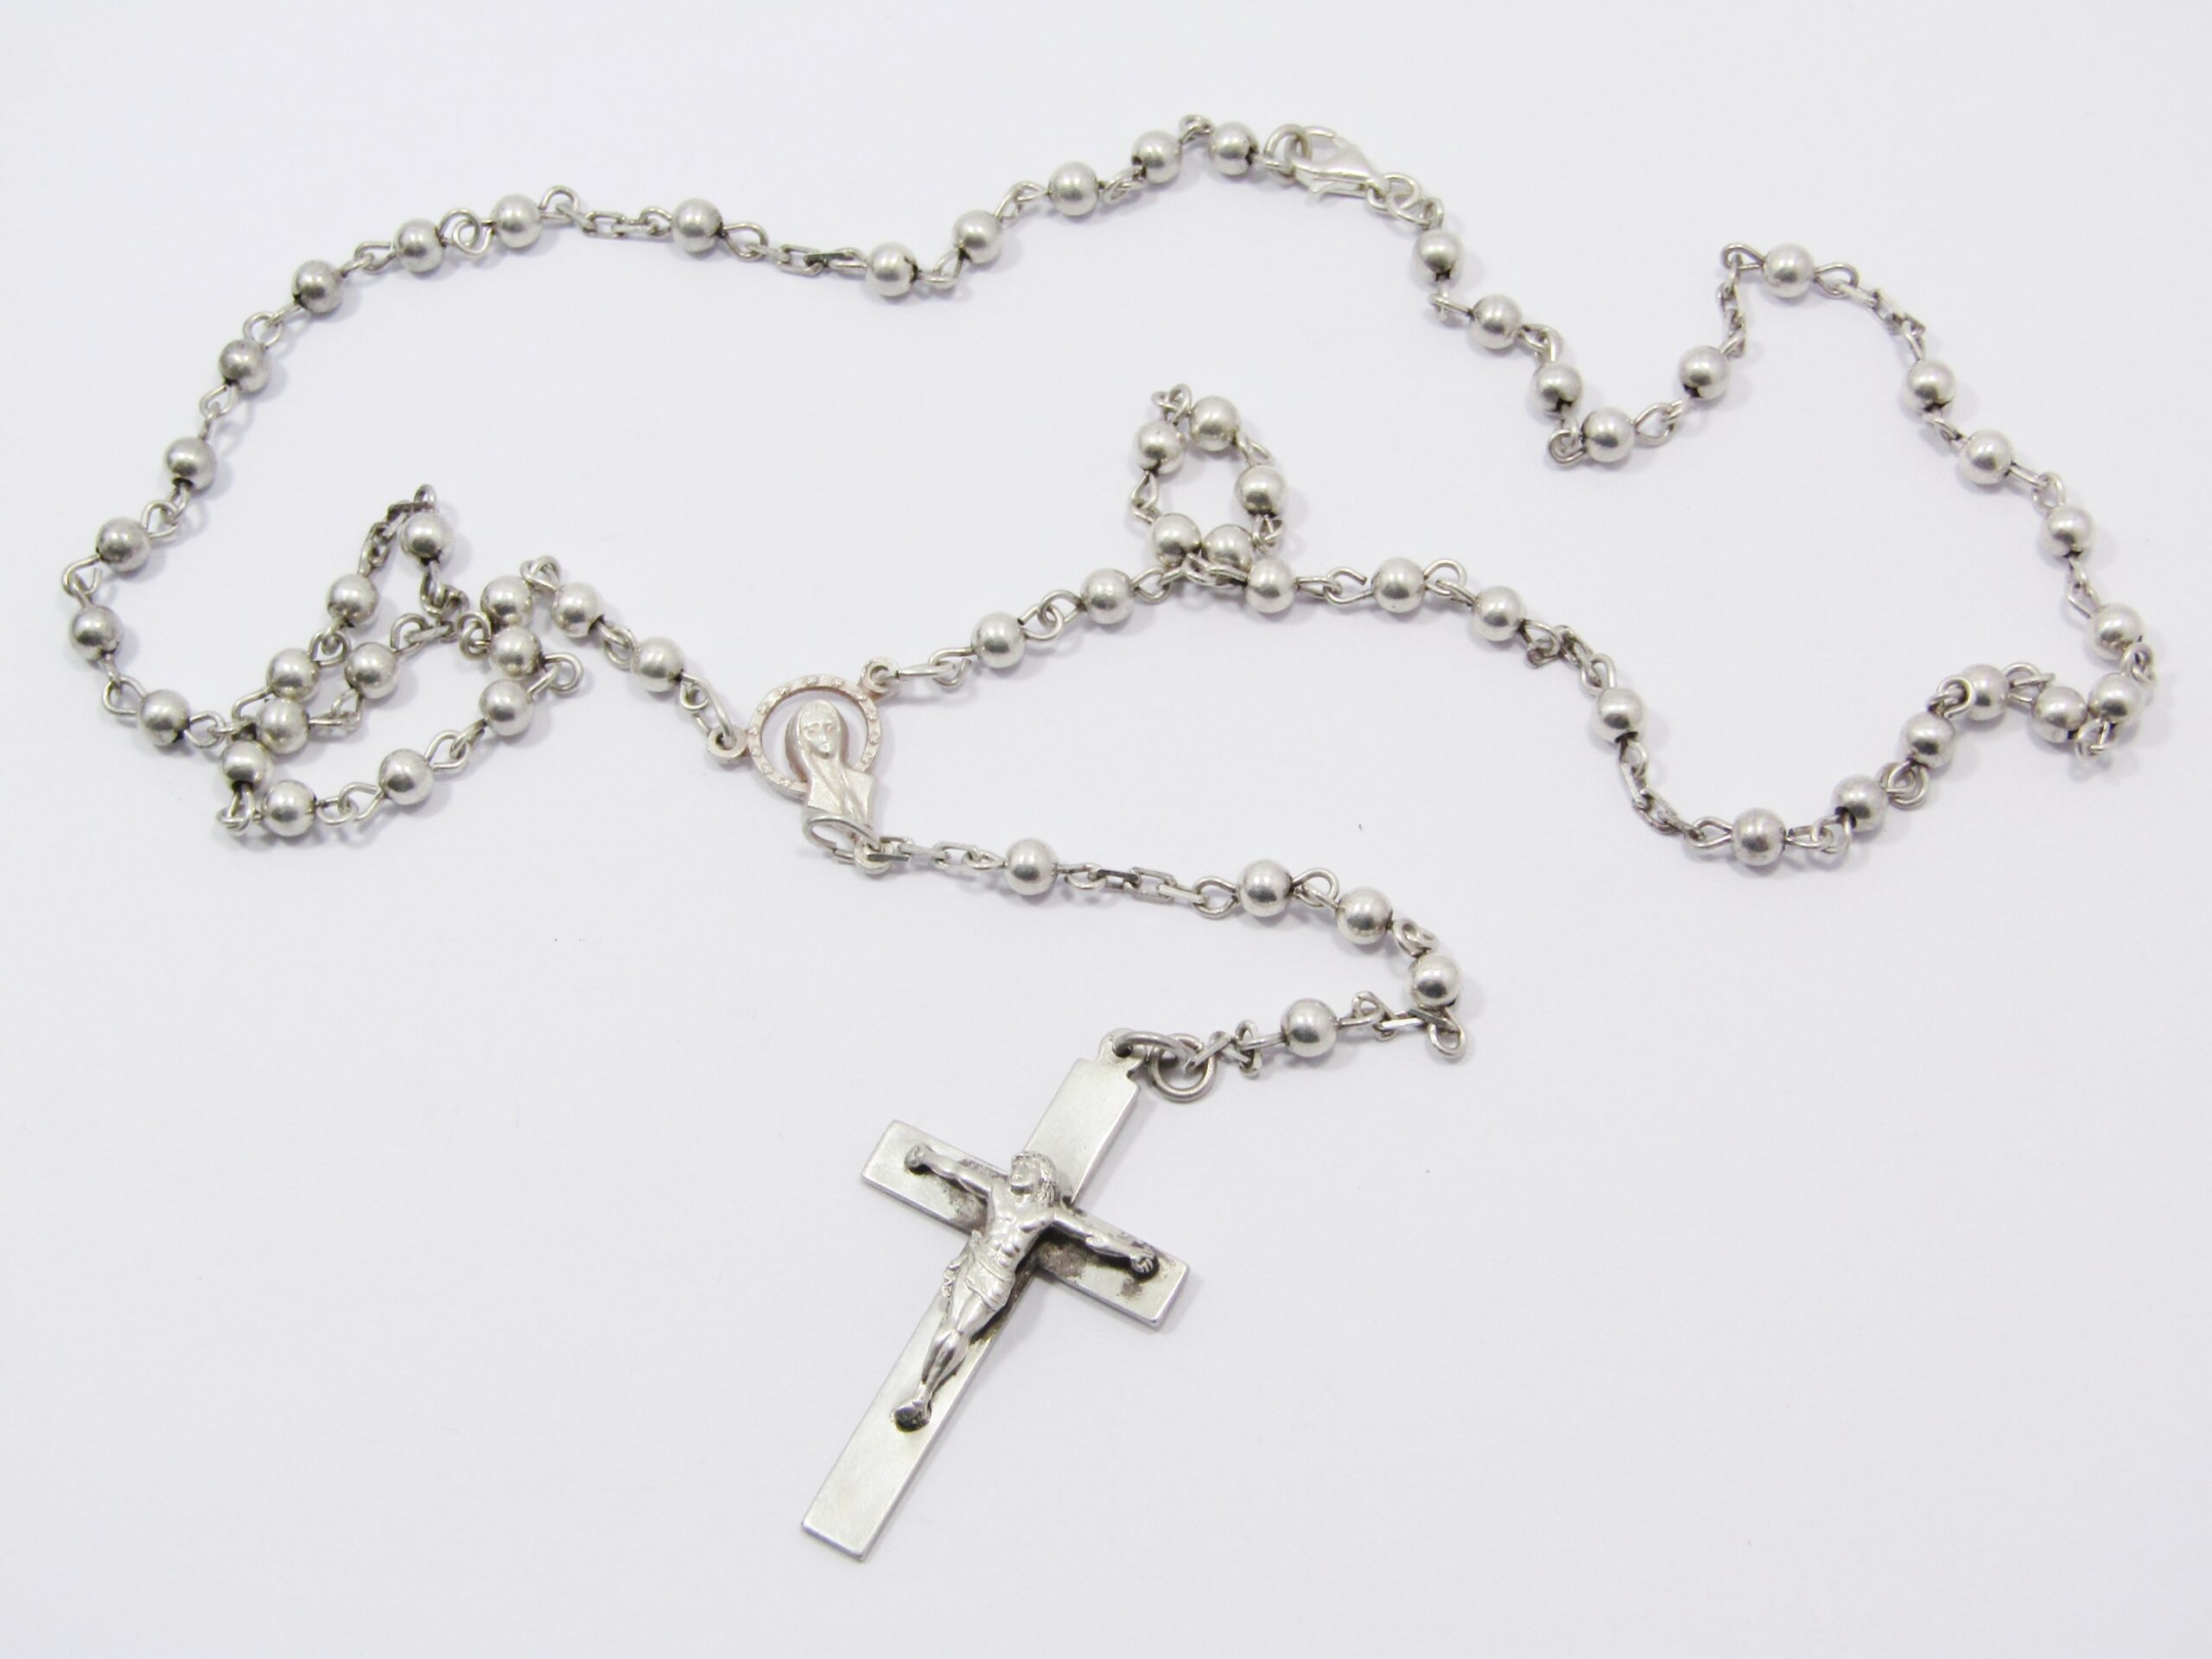 A Gorgeous Vintage Rosary Prayer Beads in Sterling Silver